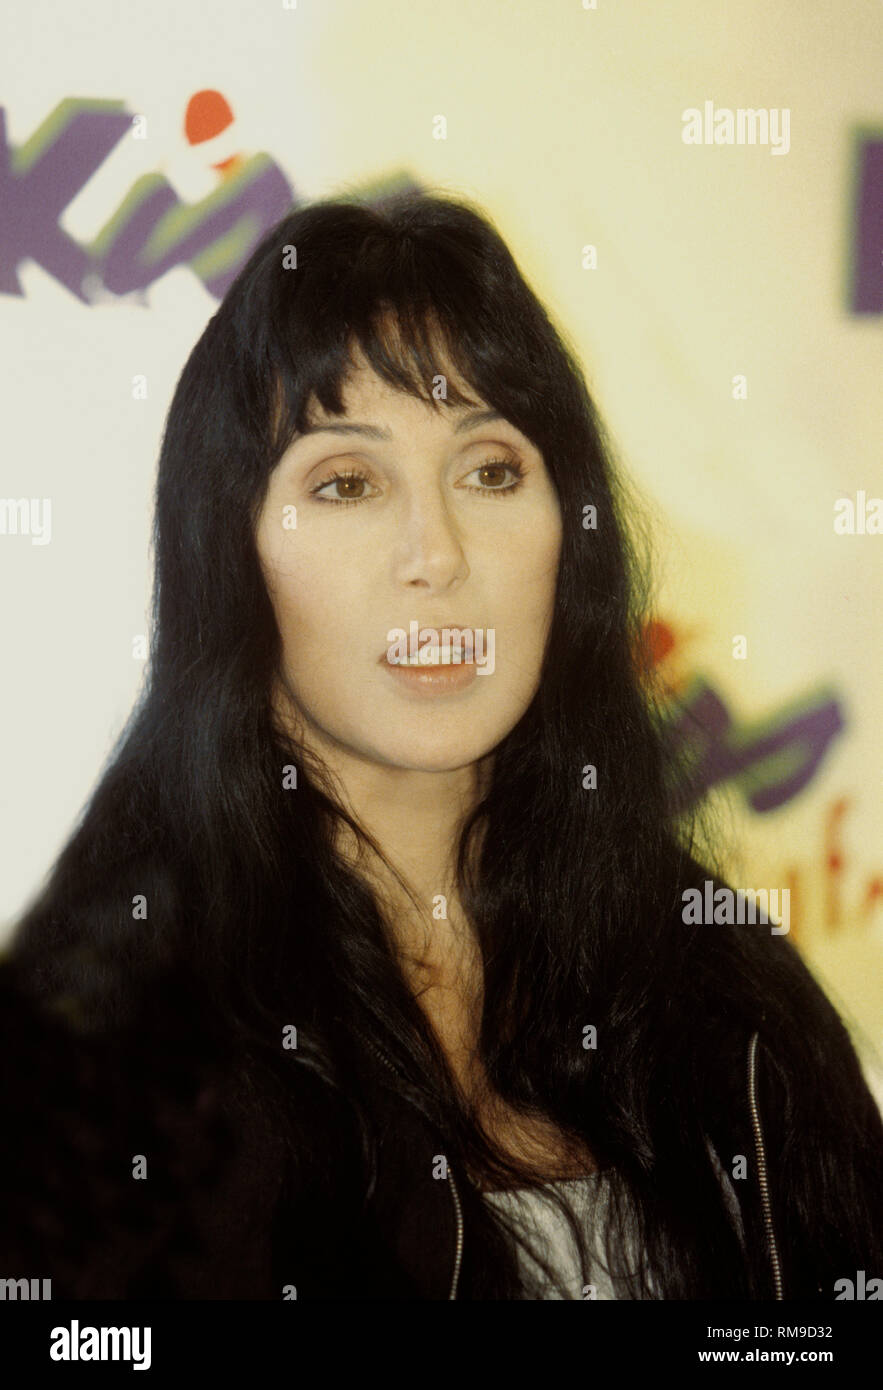 Singer, songwriter, actress and movie producer Cher, born Cherilyn Sarkisian, is shown during a press conference that followed her concert performance. Stock Photo